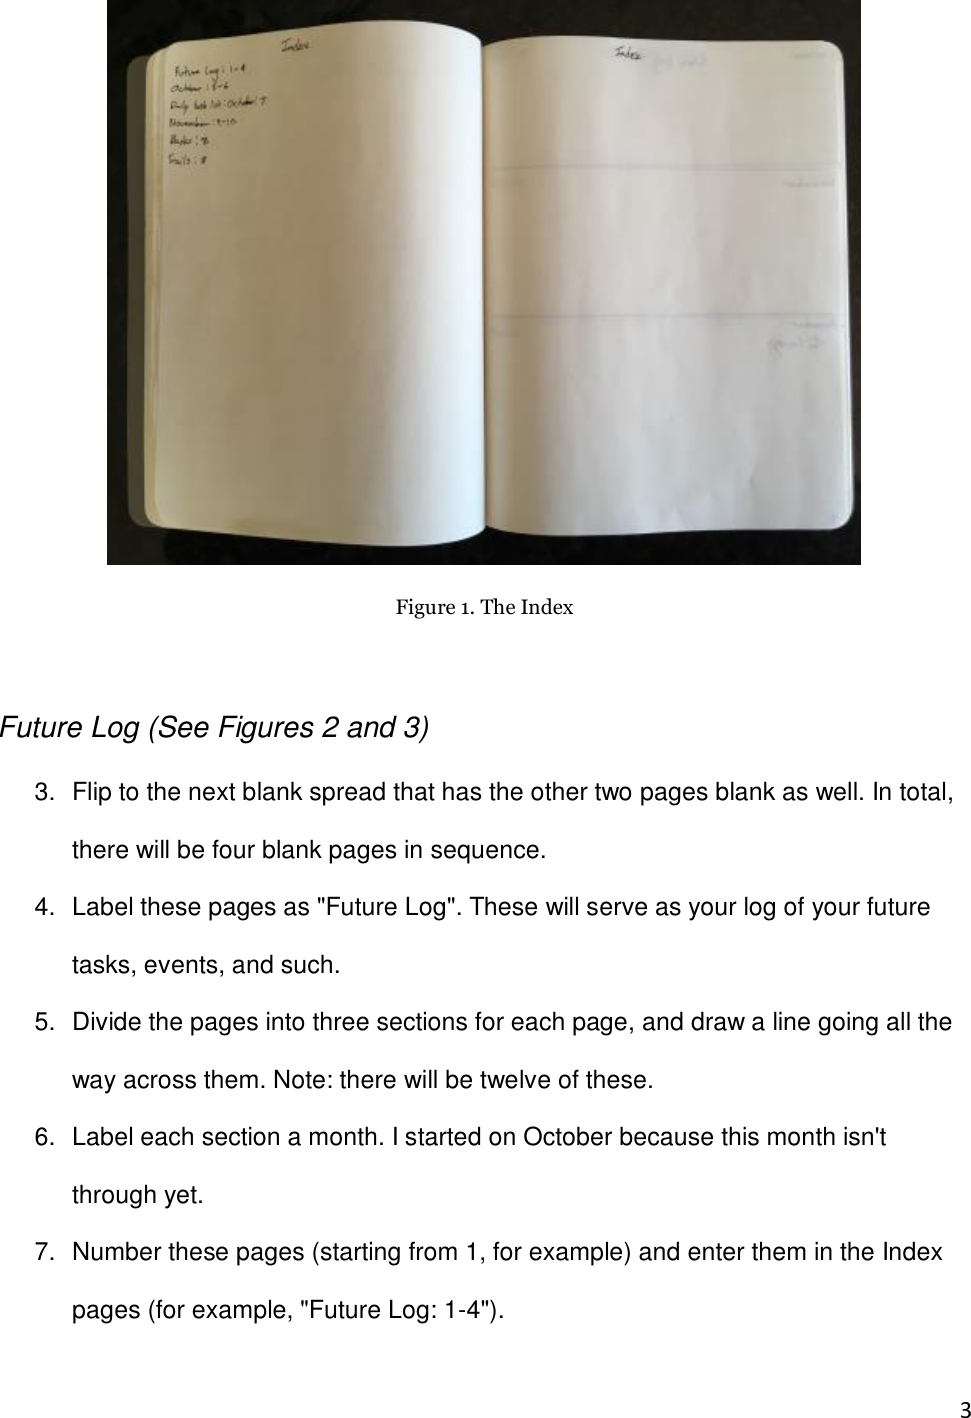 Page 3 of 10 - Instructions